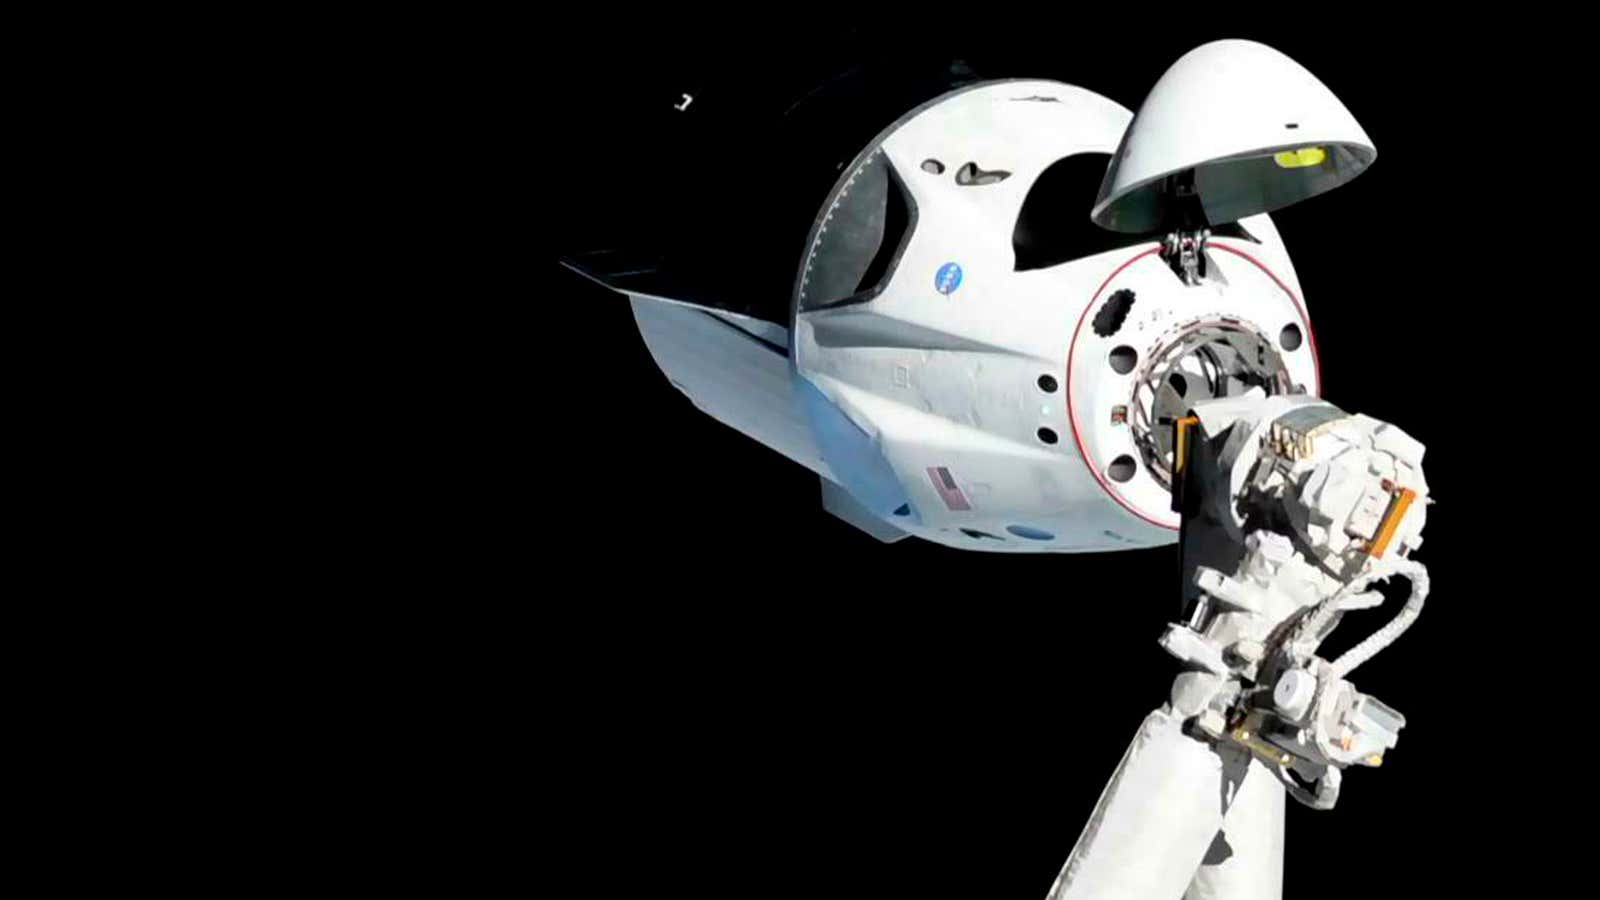 The SpaceX crew Dragon spacecraft reaches the International Space Station in March.